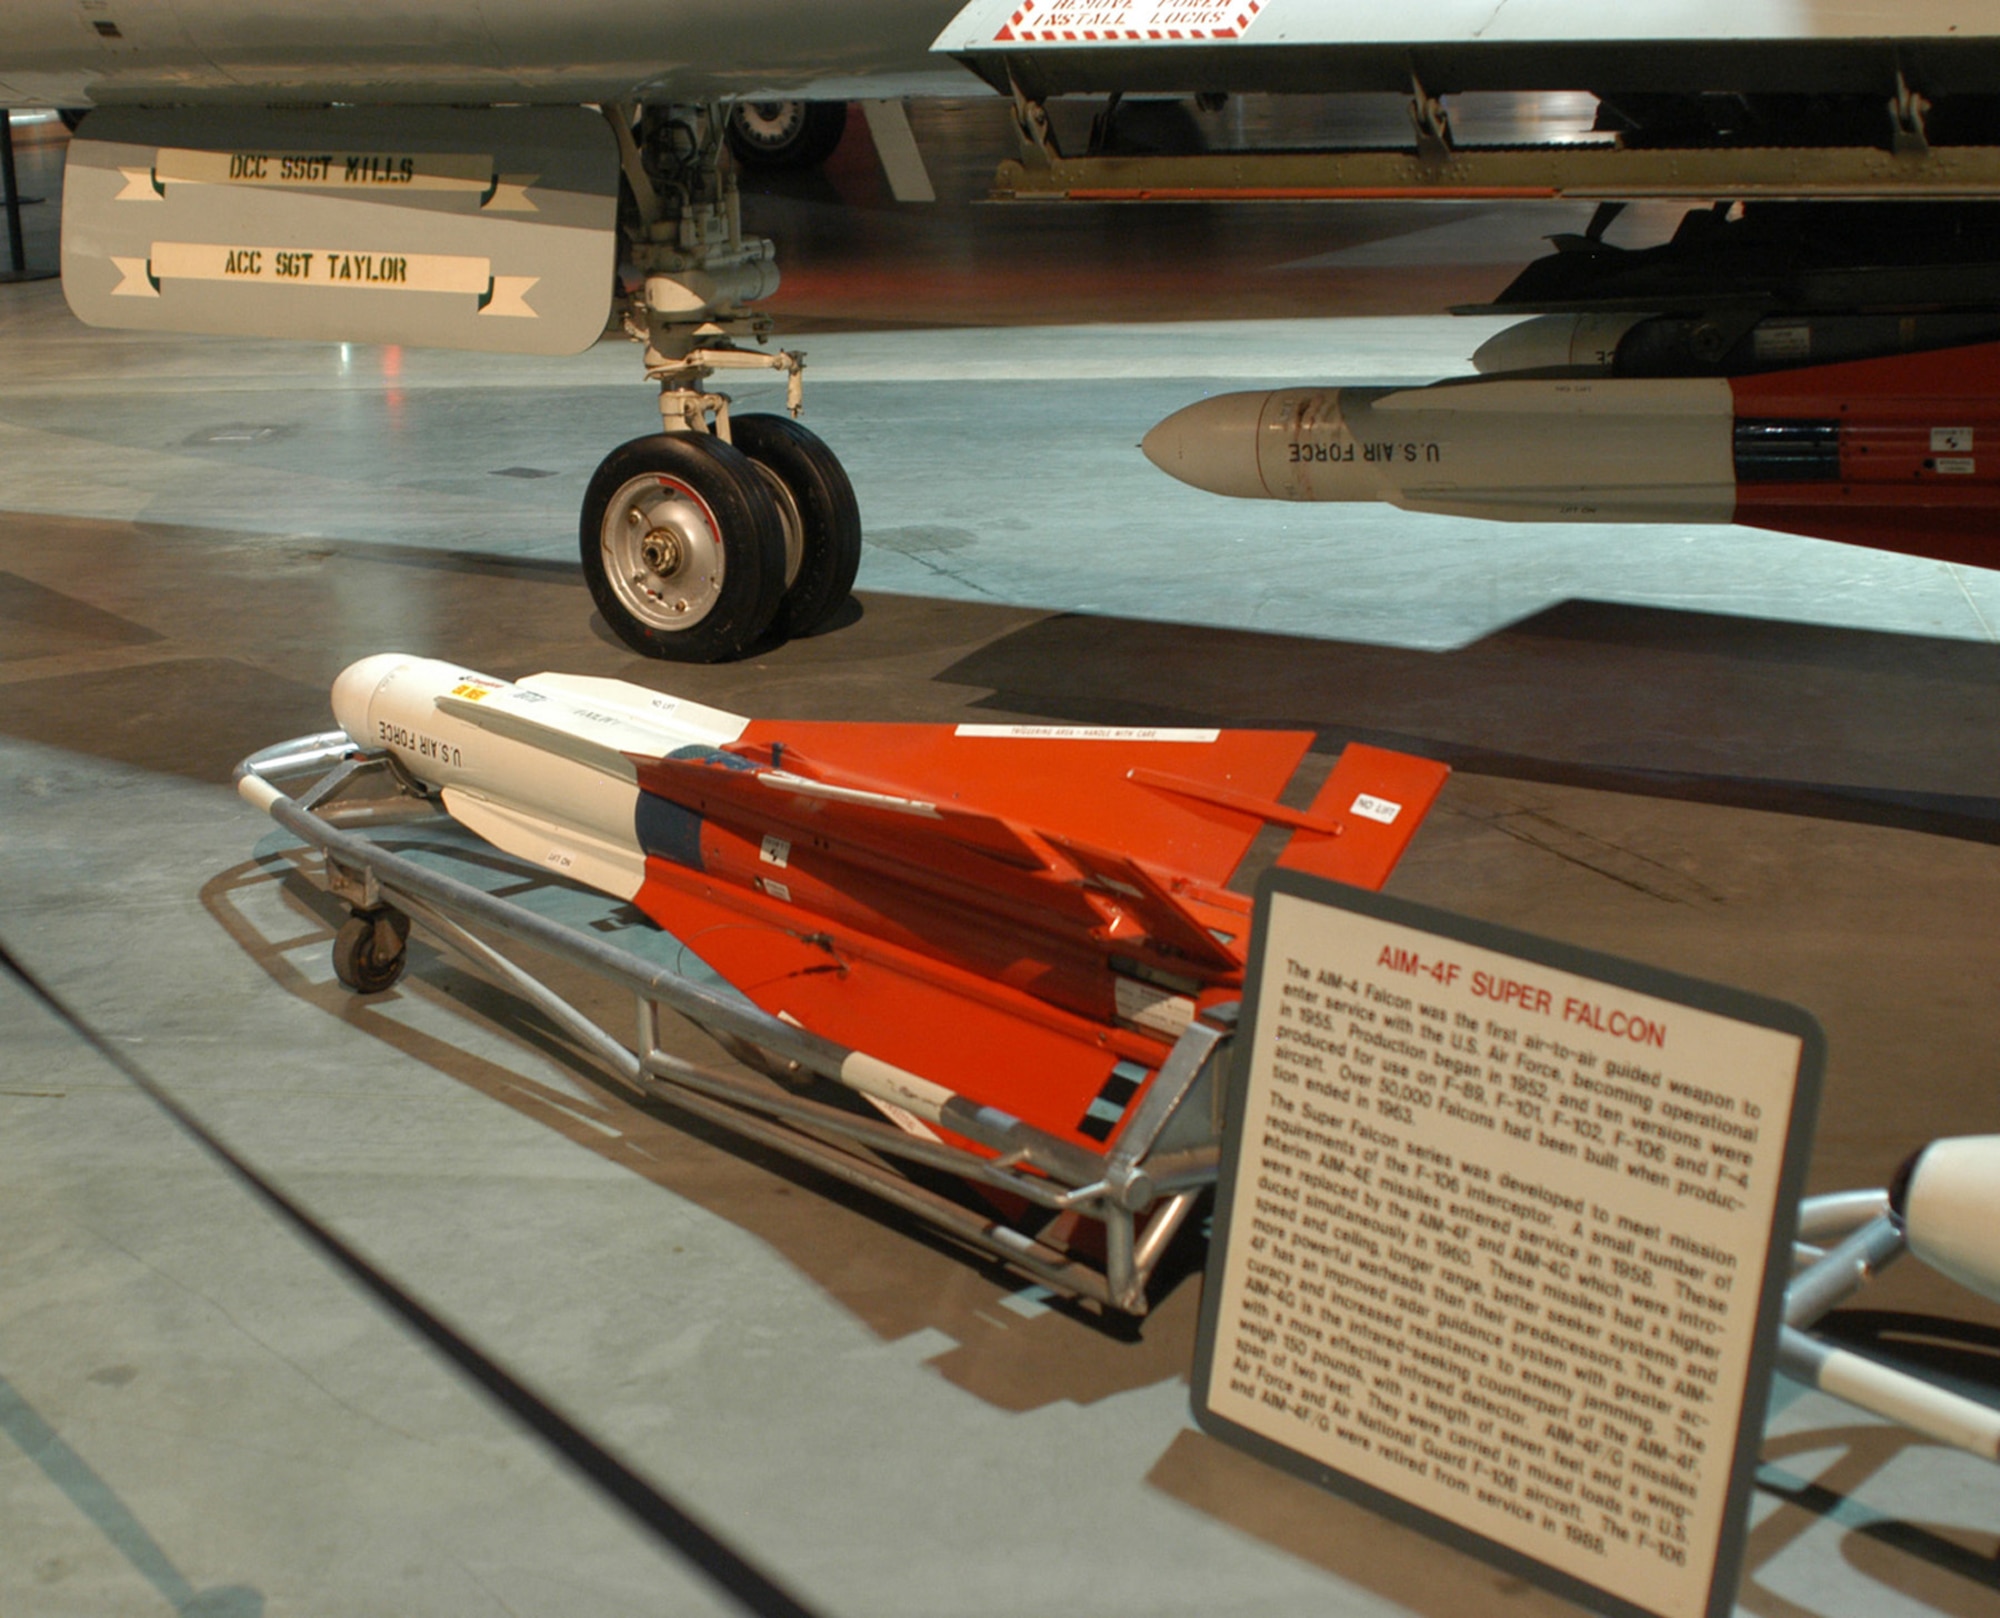 DAYTON, Ohio - Hughes AIM-4F Super Falcon Air-to-Air Missile on display at the National Museum of the U.S. Air Force. (U.S. Air Force photo)